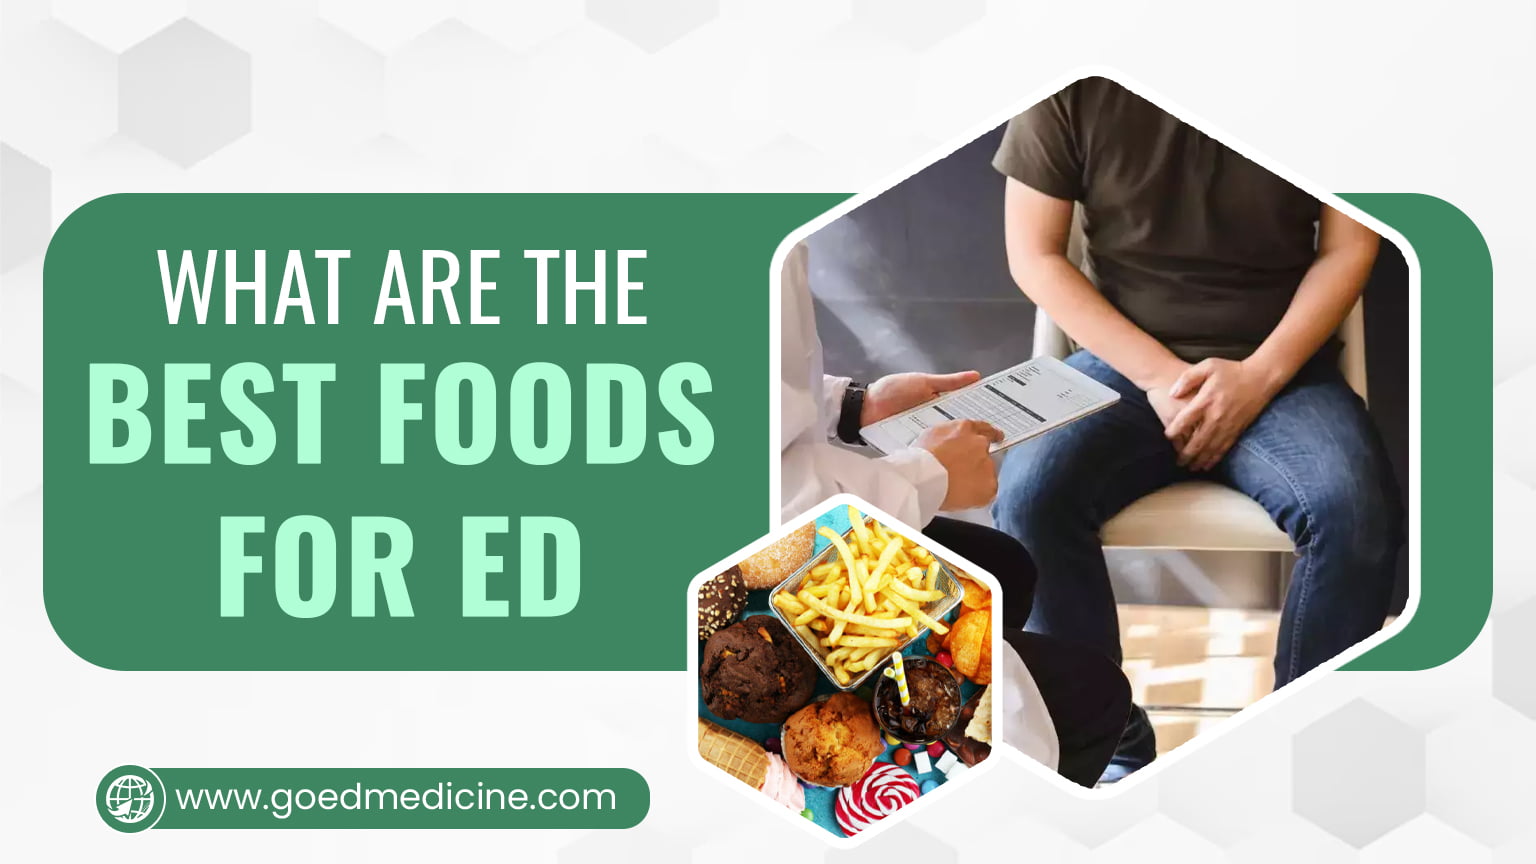 What Are the Best Foods for ED